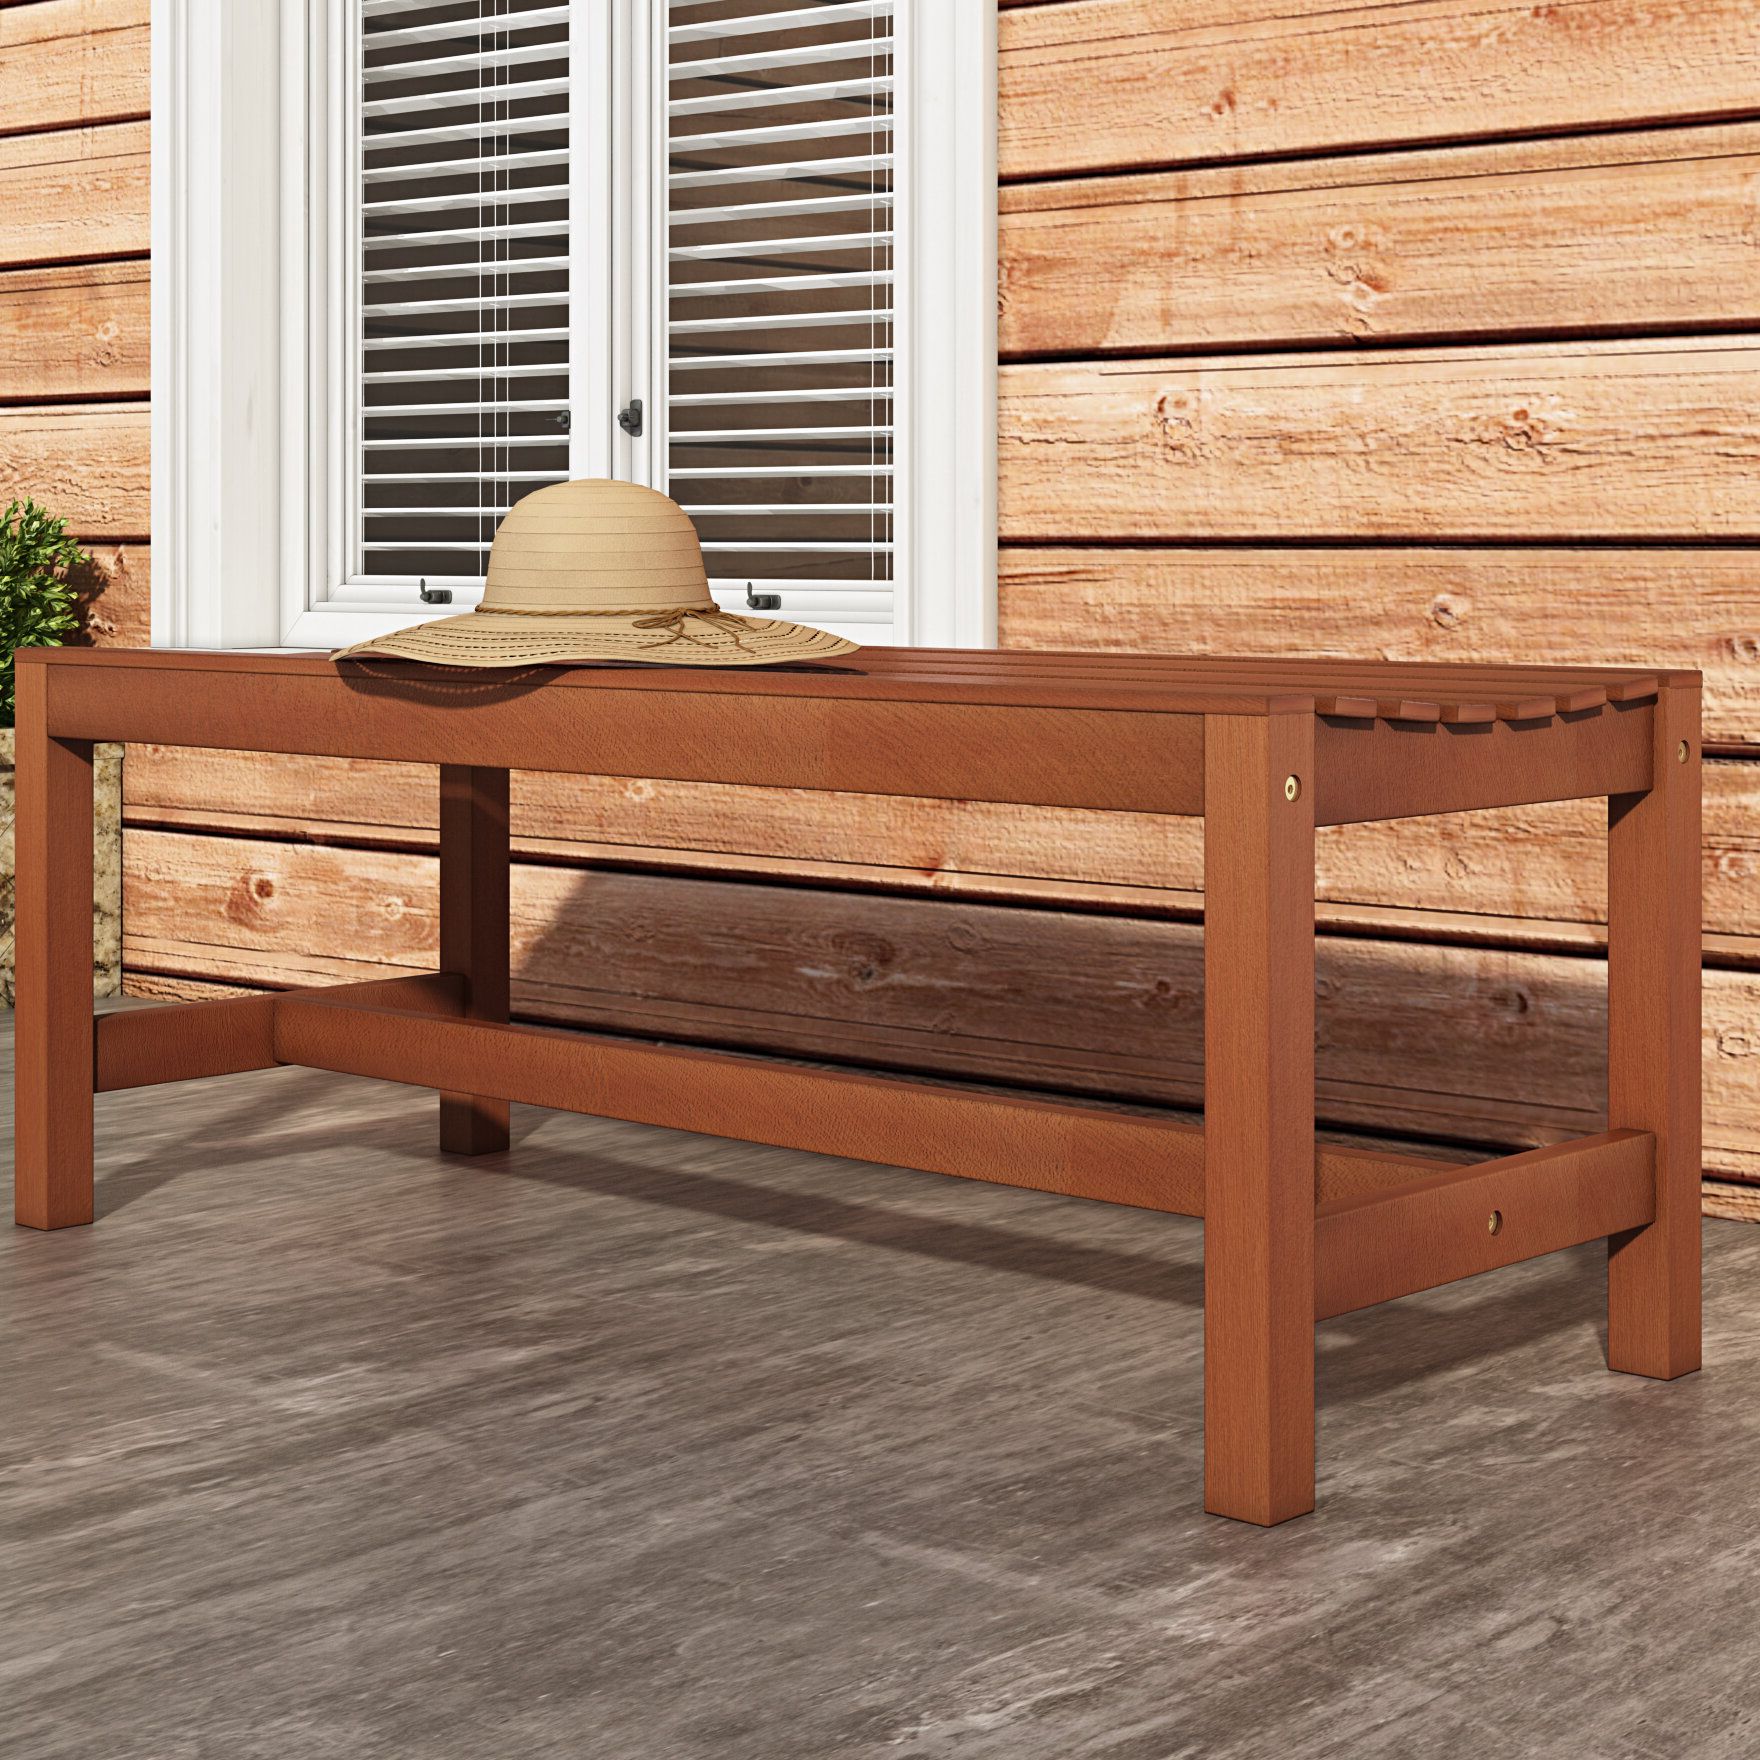 Latest Amabel Wooden Garden Benches With Regard To Amabel Wooden Outdoor Picnic Bench (View 9 of 30)